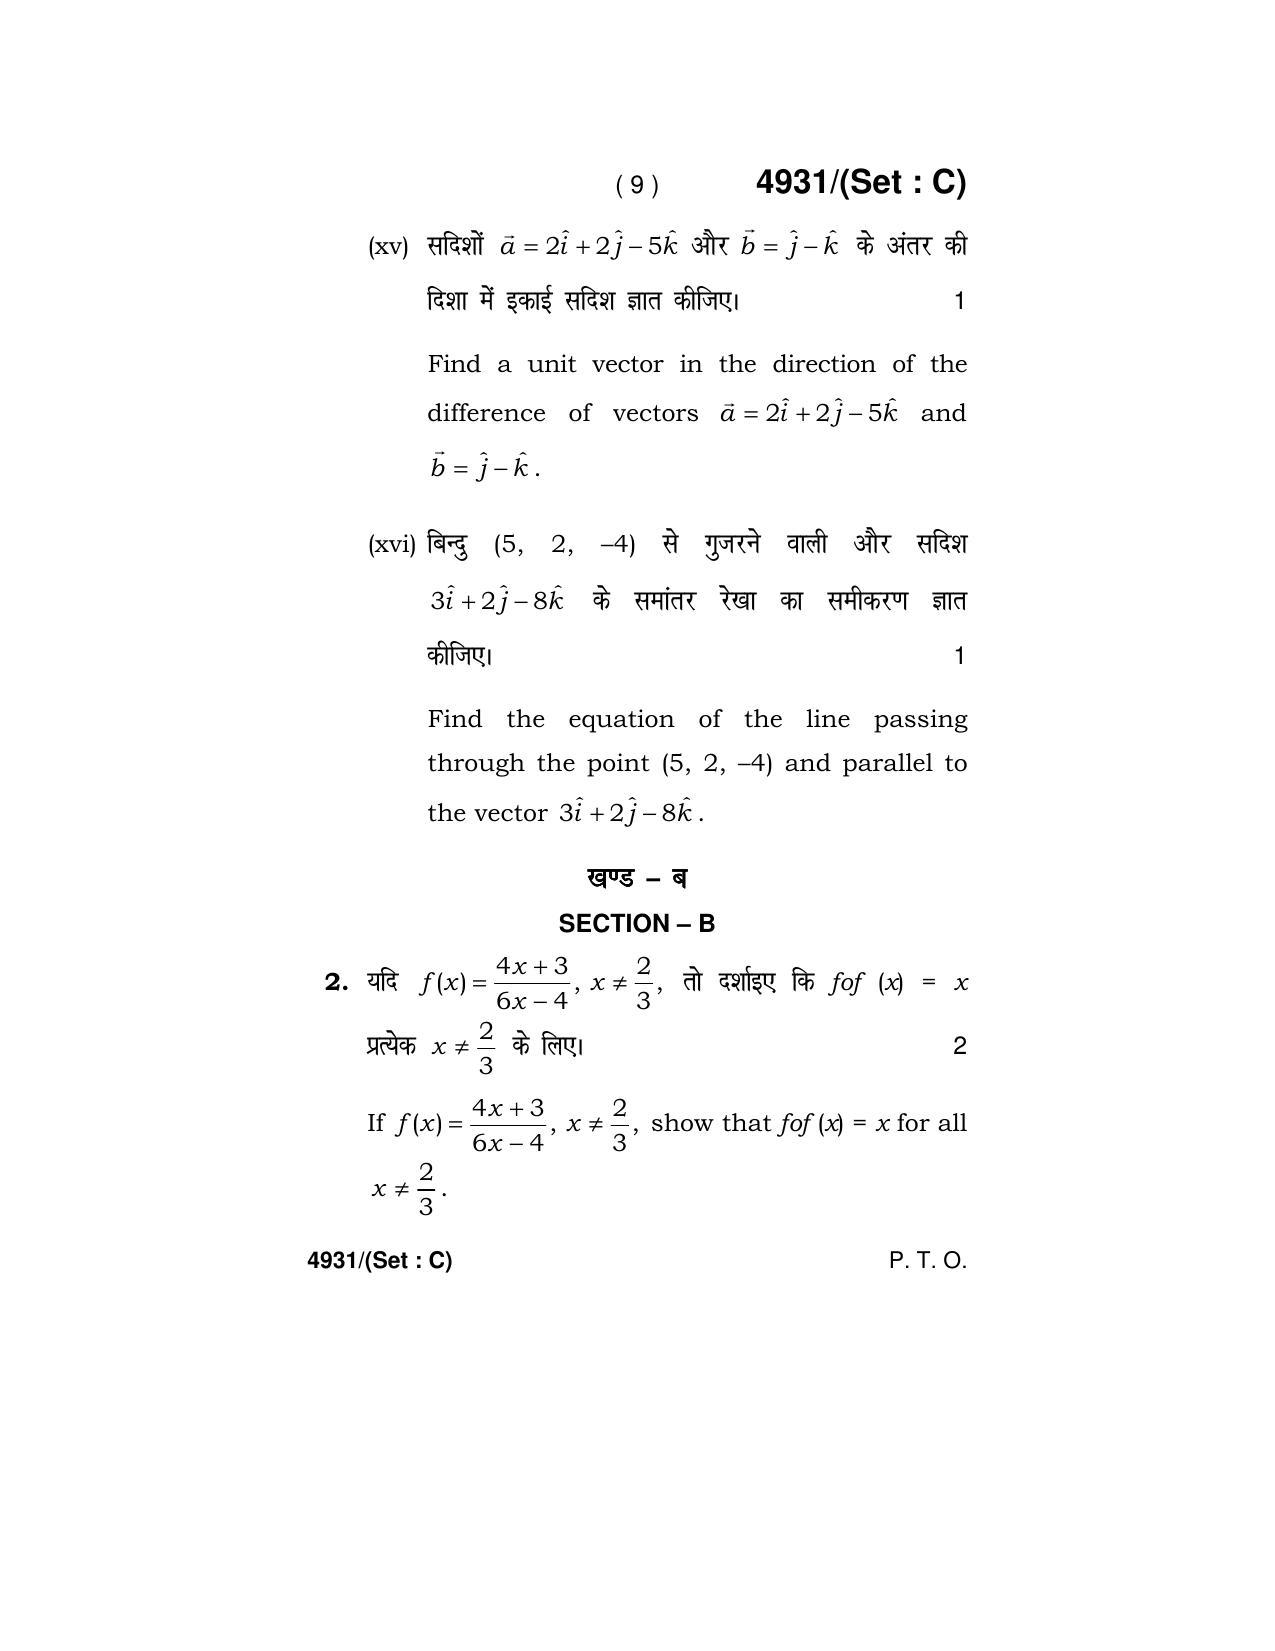 Haryana Board HBSE Class 12 Mathematics 2020 Question Paper - Page 41